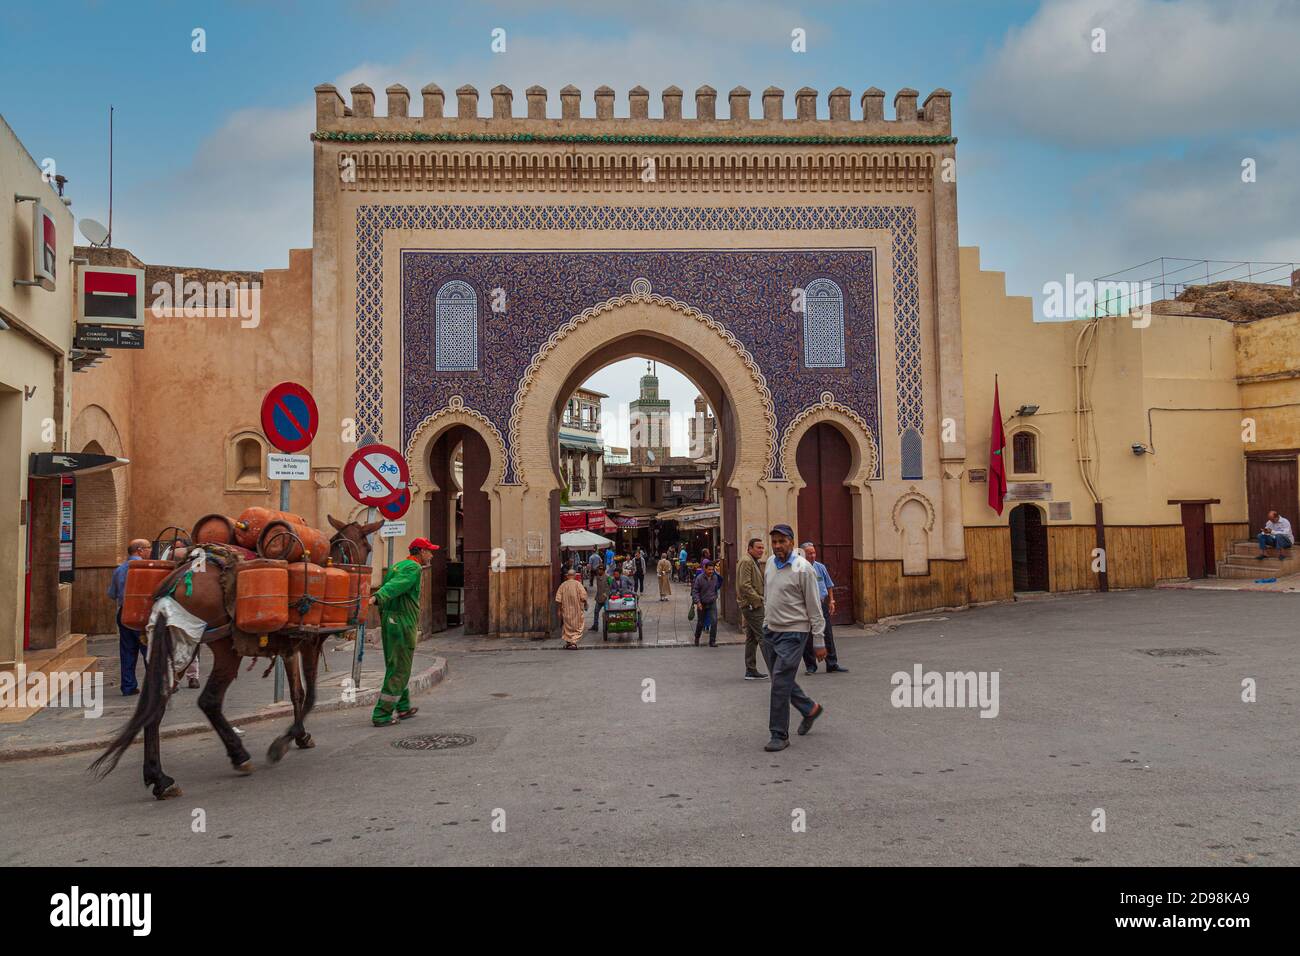 The blue gate Bab Abi al-Jounoud or Bab Bou Jeloud is an ornate city gate and the main western entrance to Fes el Bali, the old city of Fez, Morocco Stock Photo